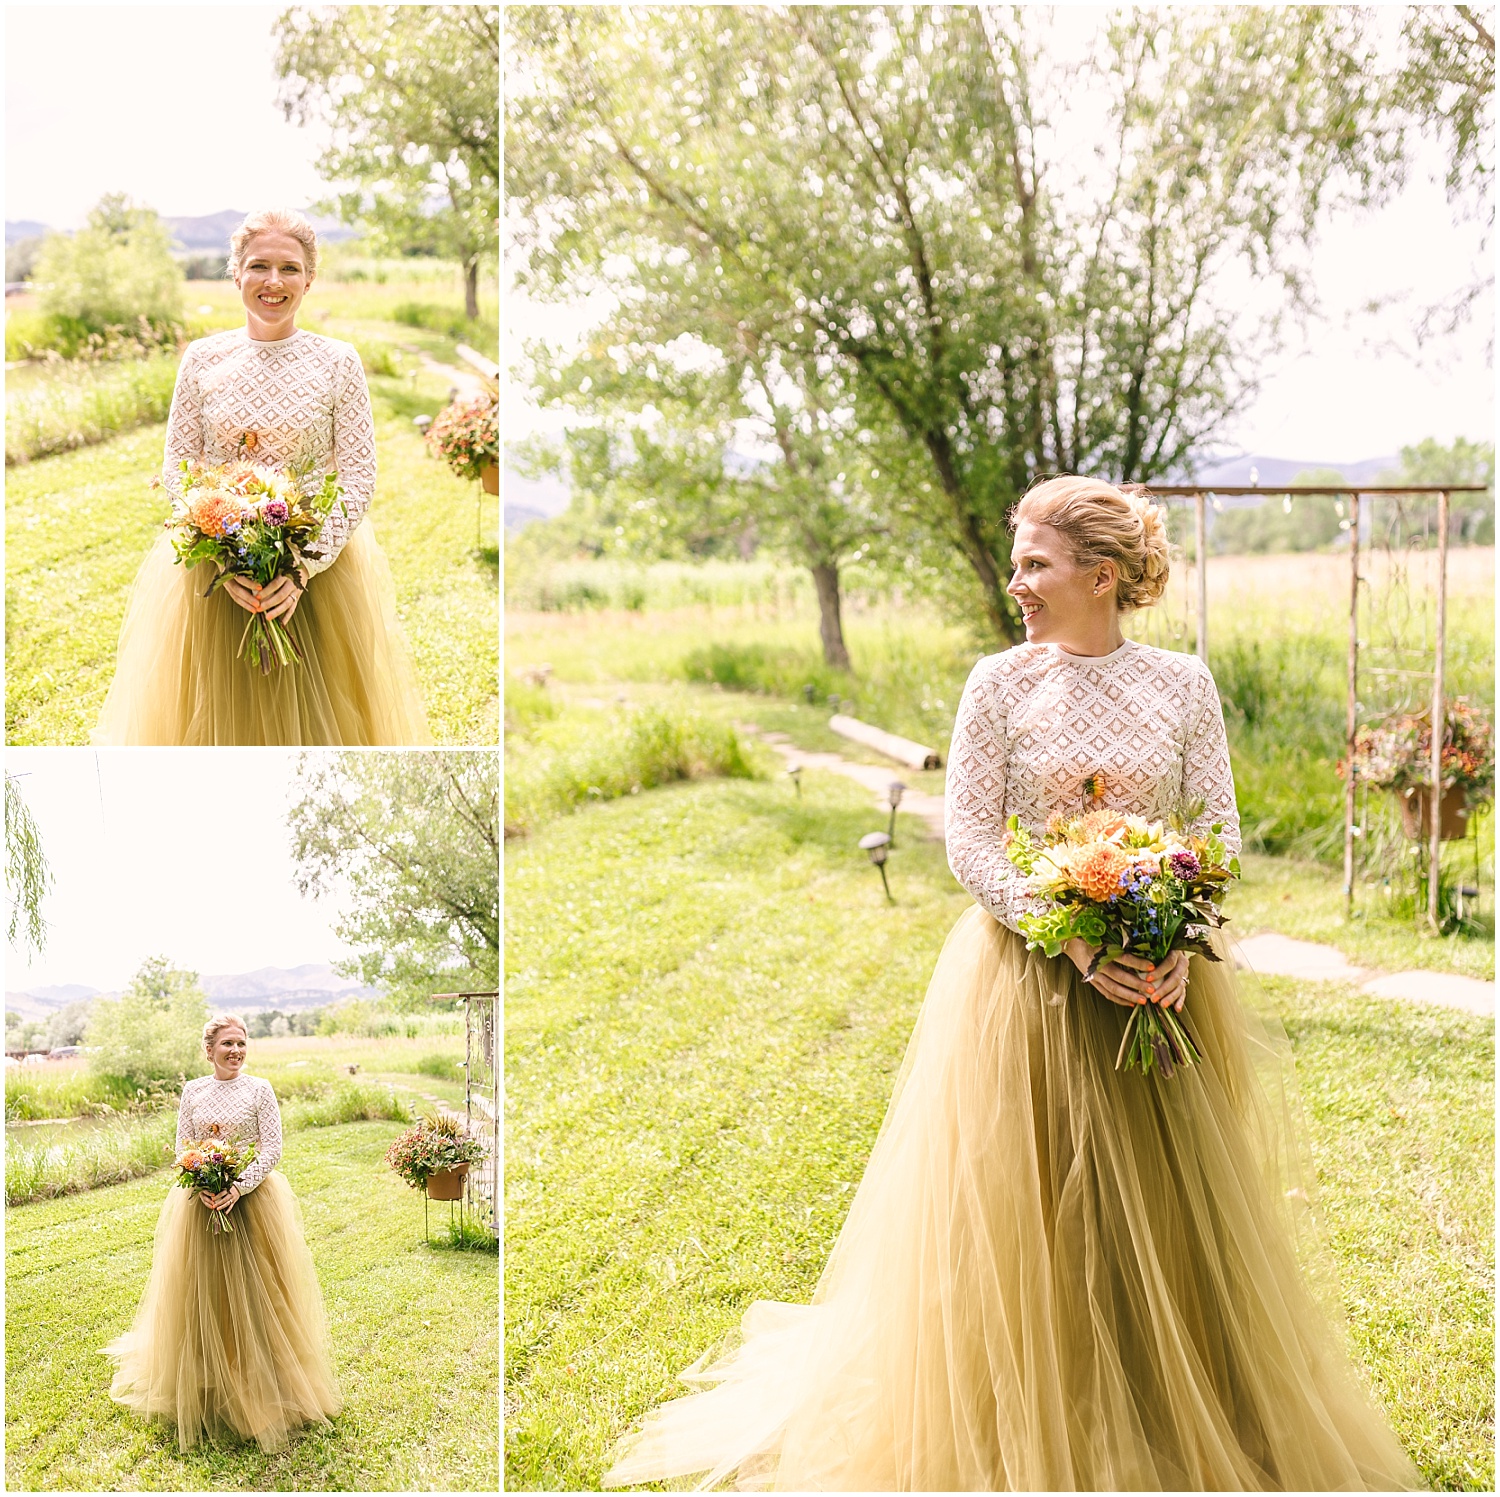 Bride with flowy green skirt and rustic bouquet under the willow tree at Pastures of Plenty wedding